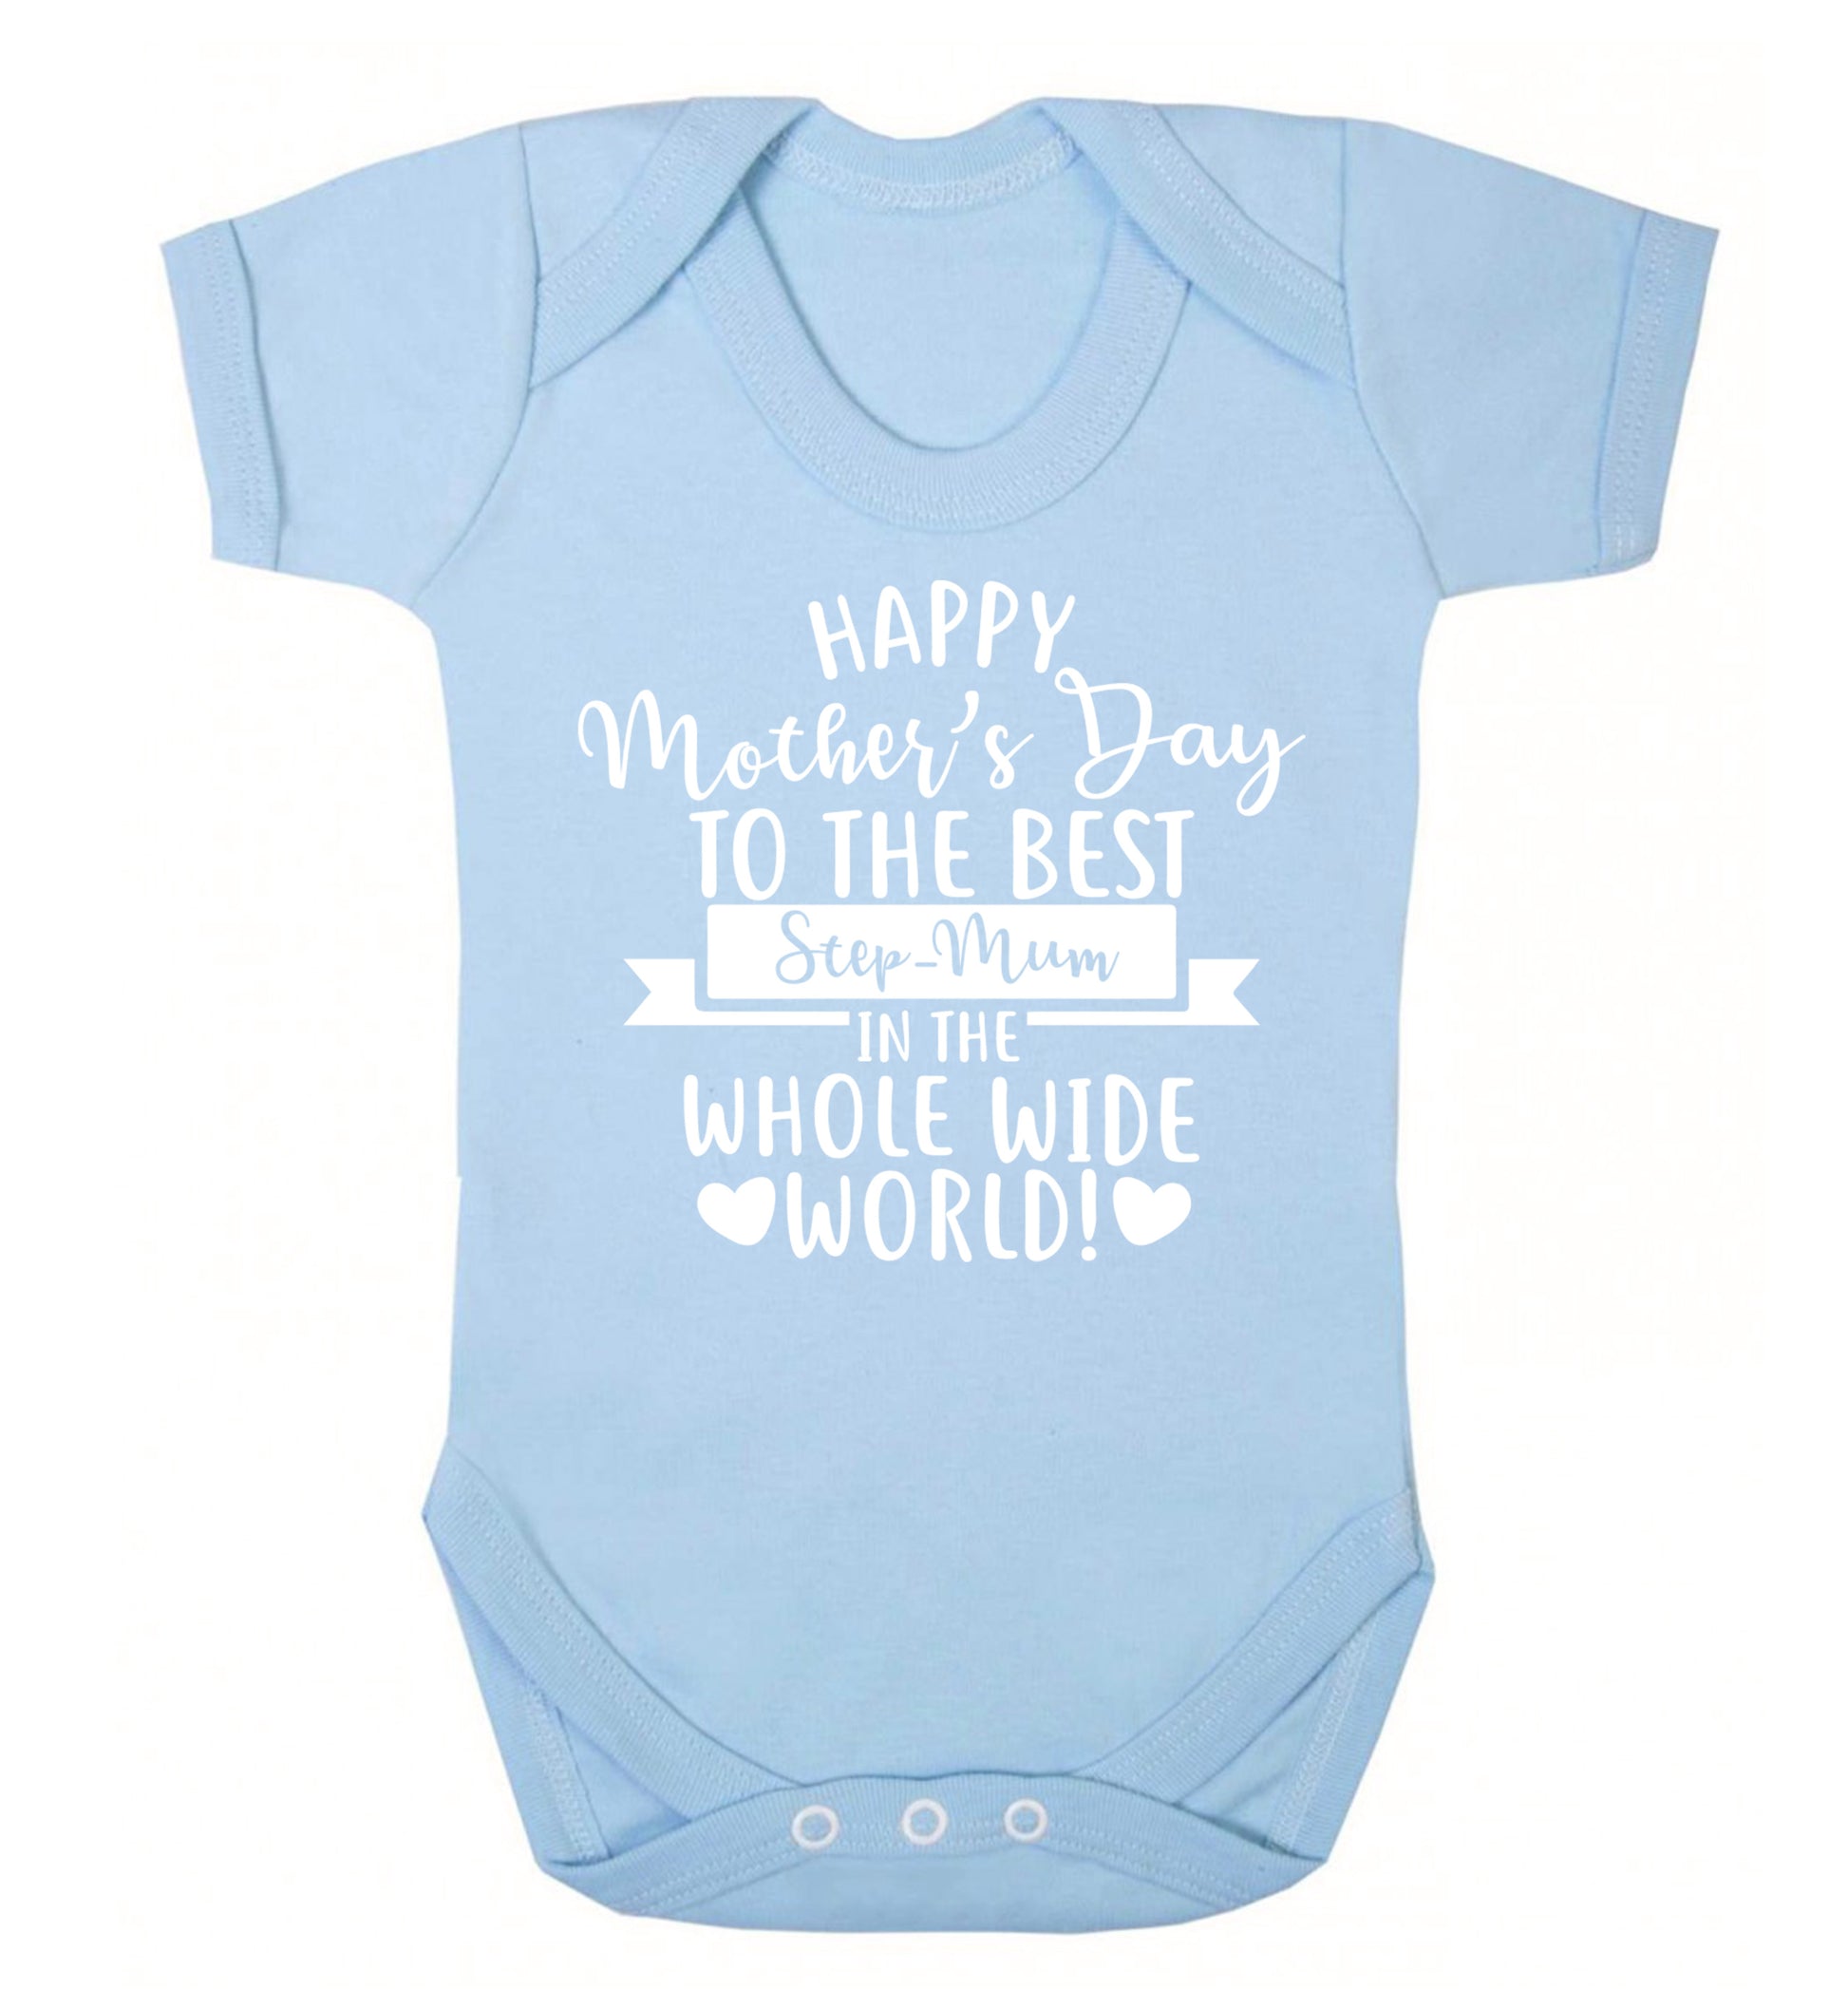 Happy mother's day to the best step-mum in the world Baby Vest pale blue 18-24 months